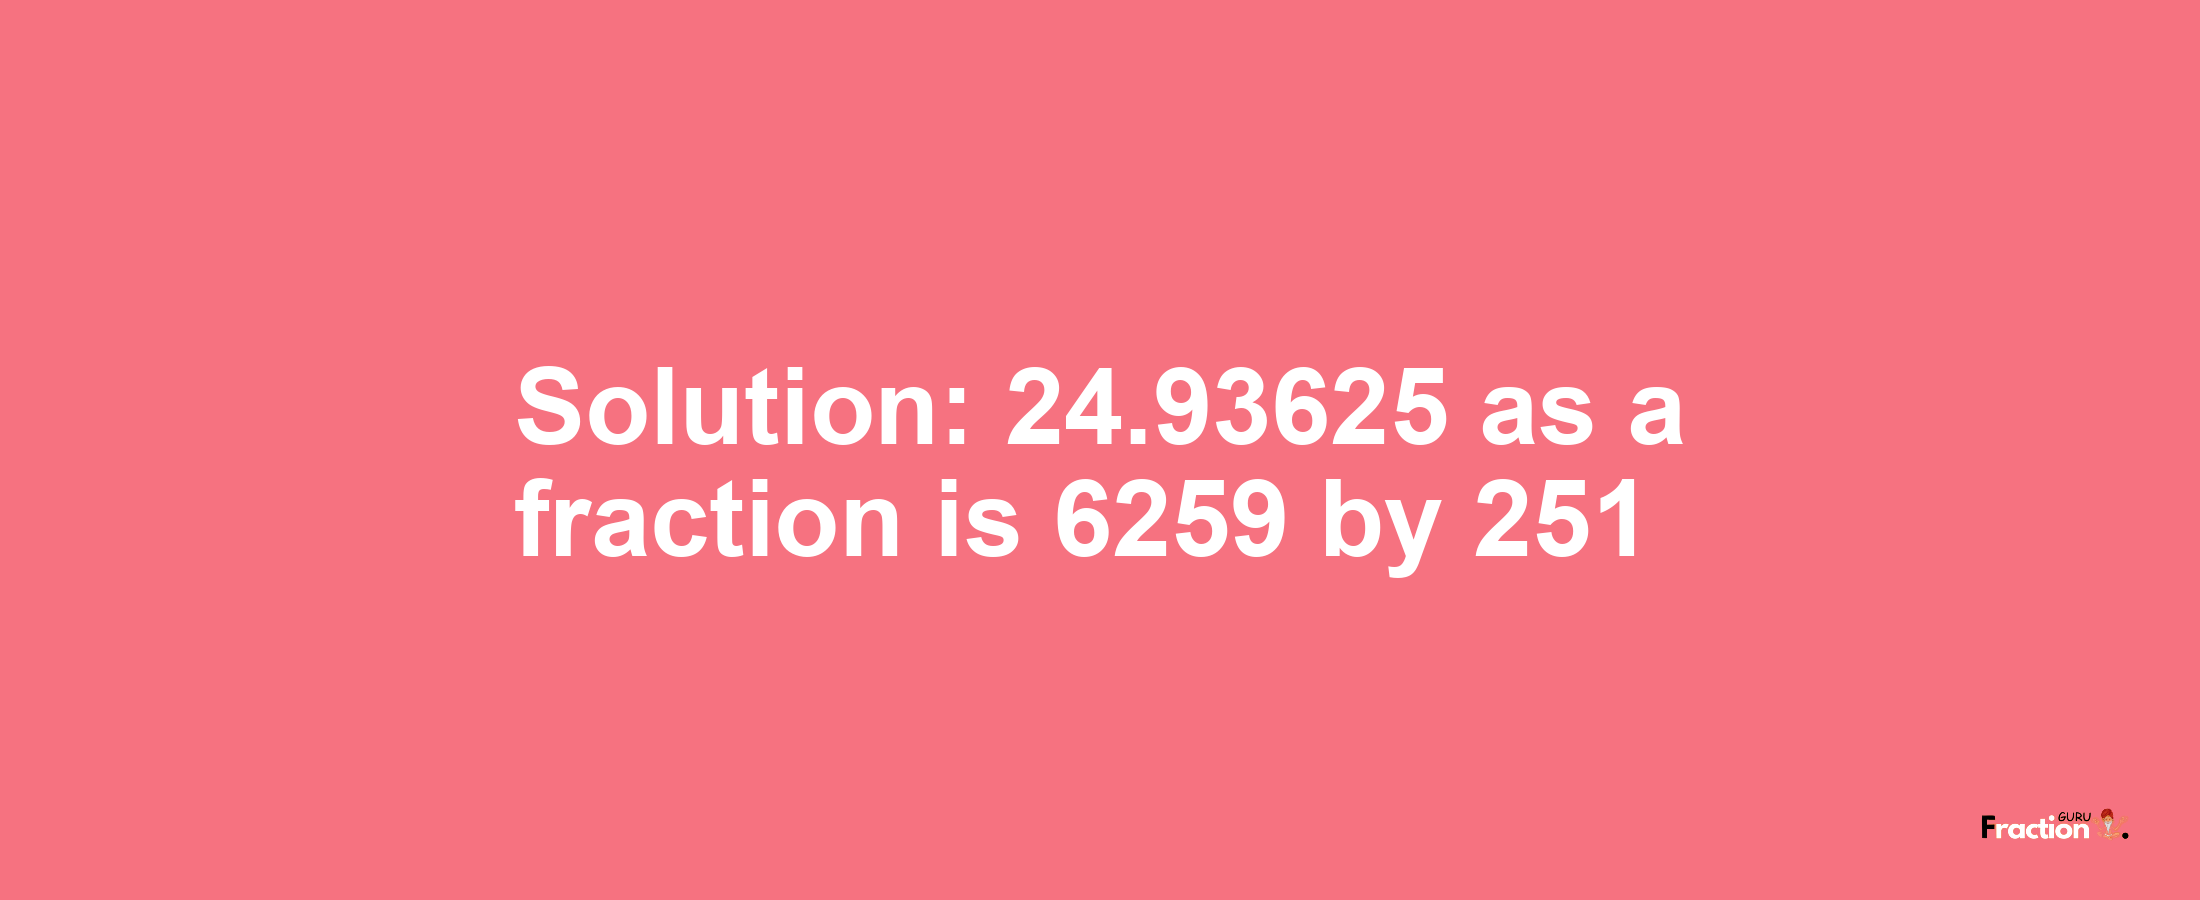 Solution:24.93625 as a fraction is 6259/251